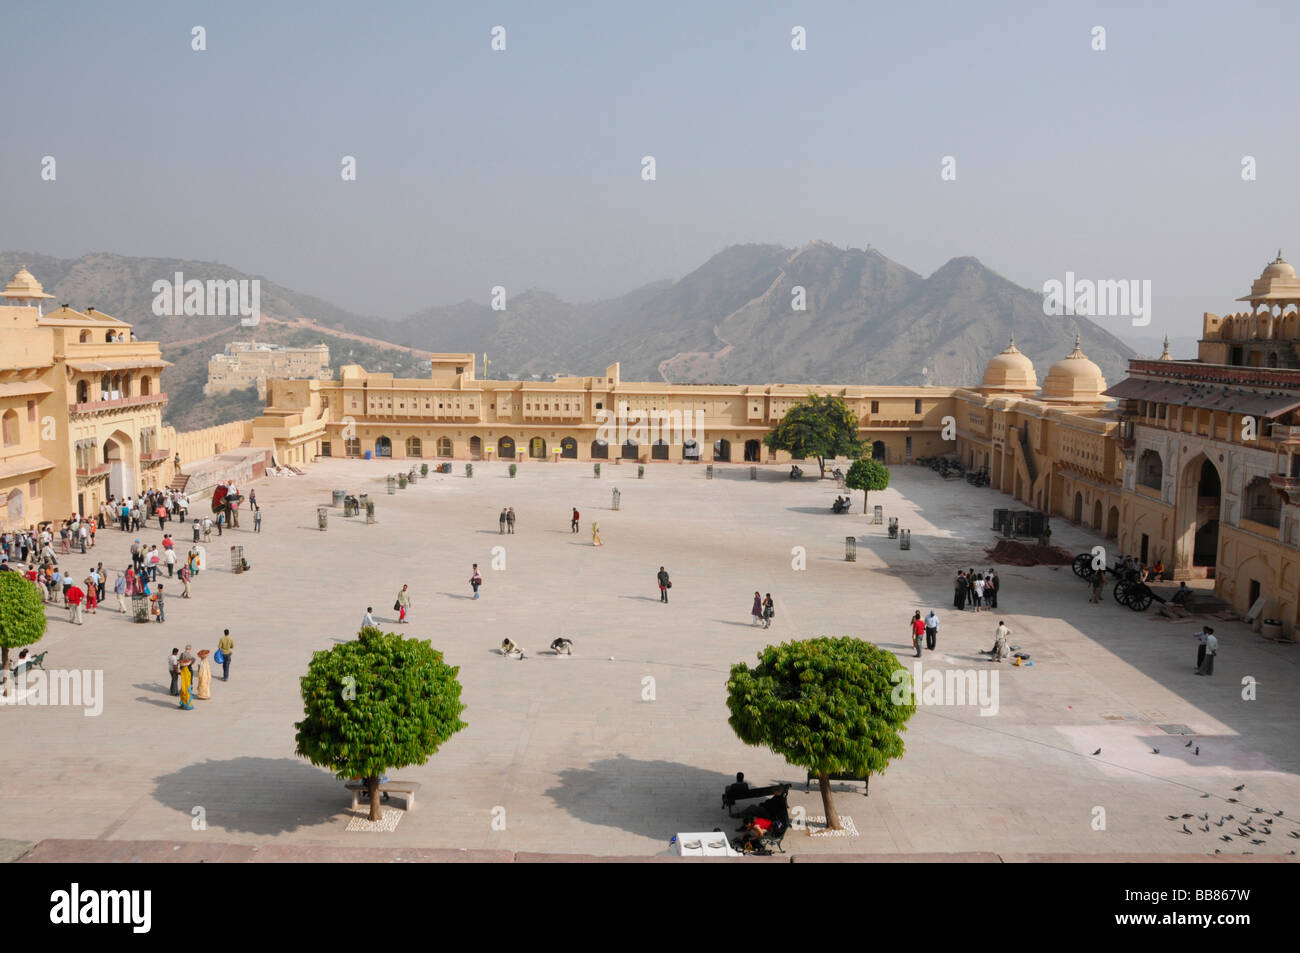 Panoramic view, Fort Amber Palace, Amber, Rajasthan, North India, Asia Stock Photo